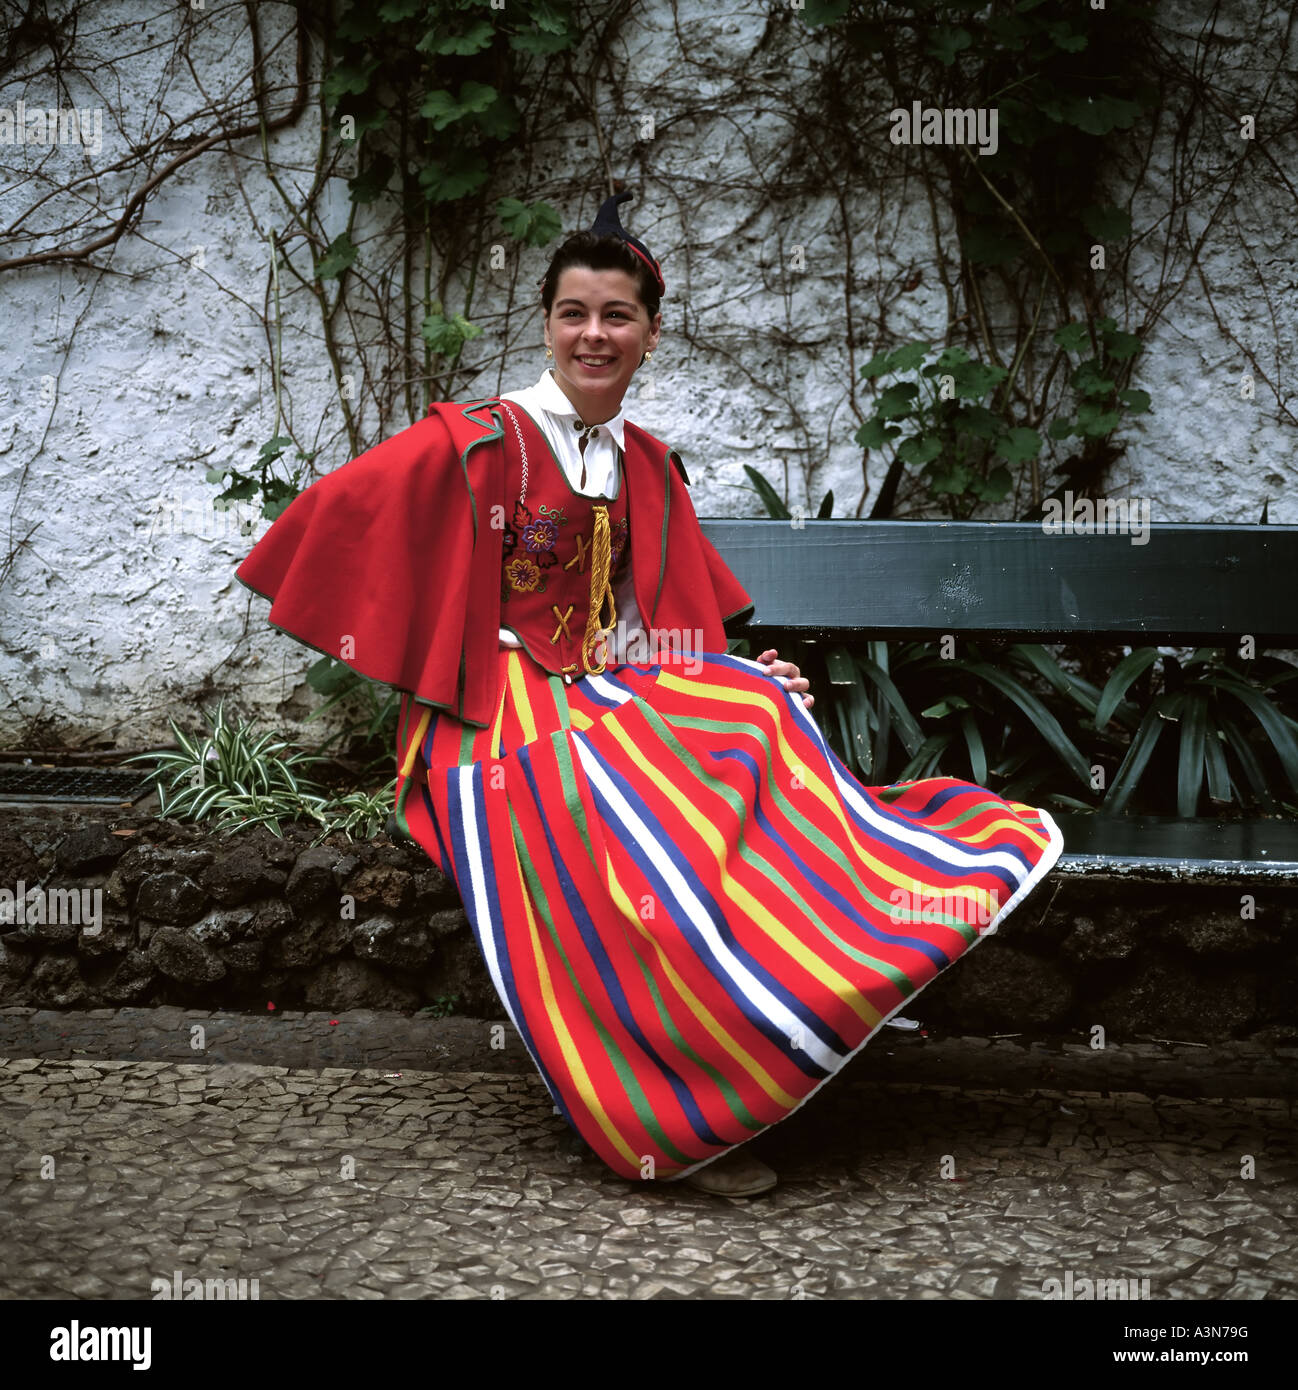 Portuguese Clothing Styles